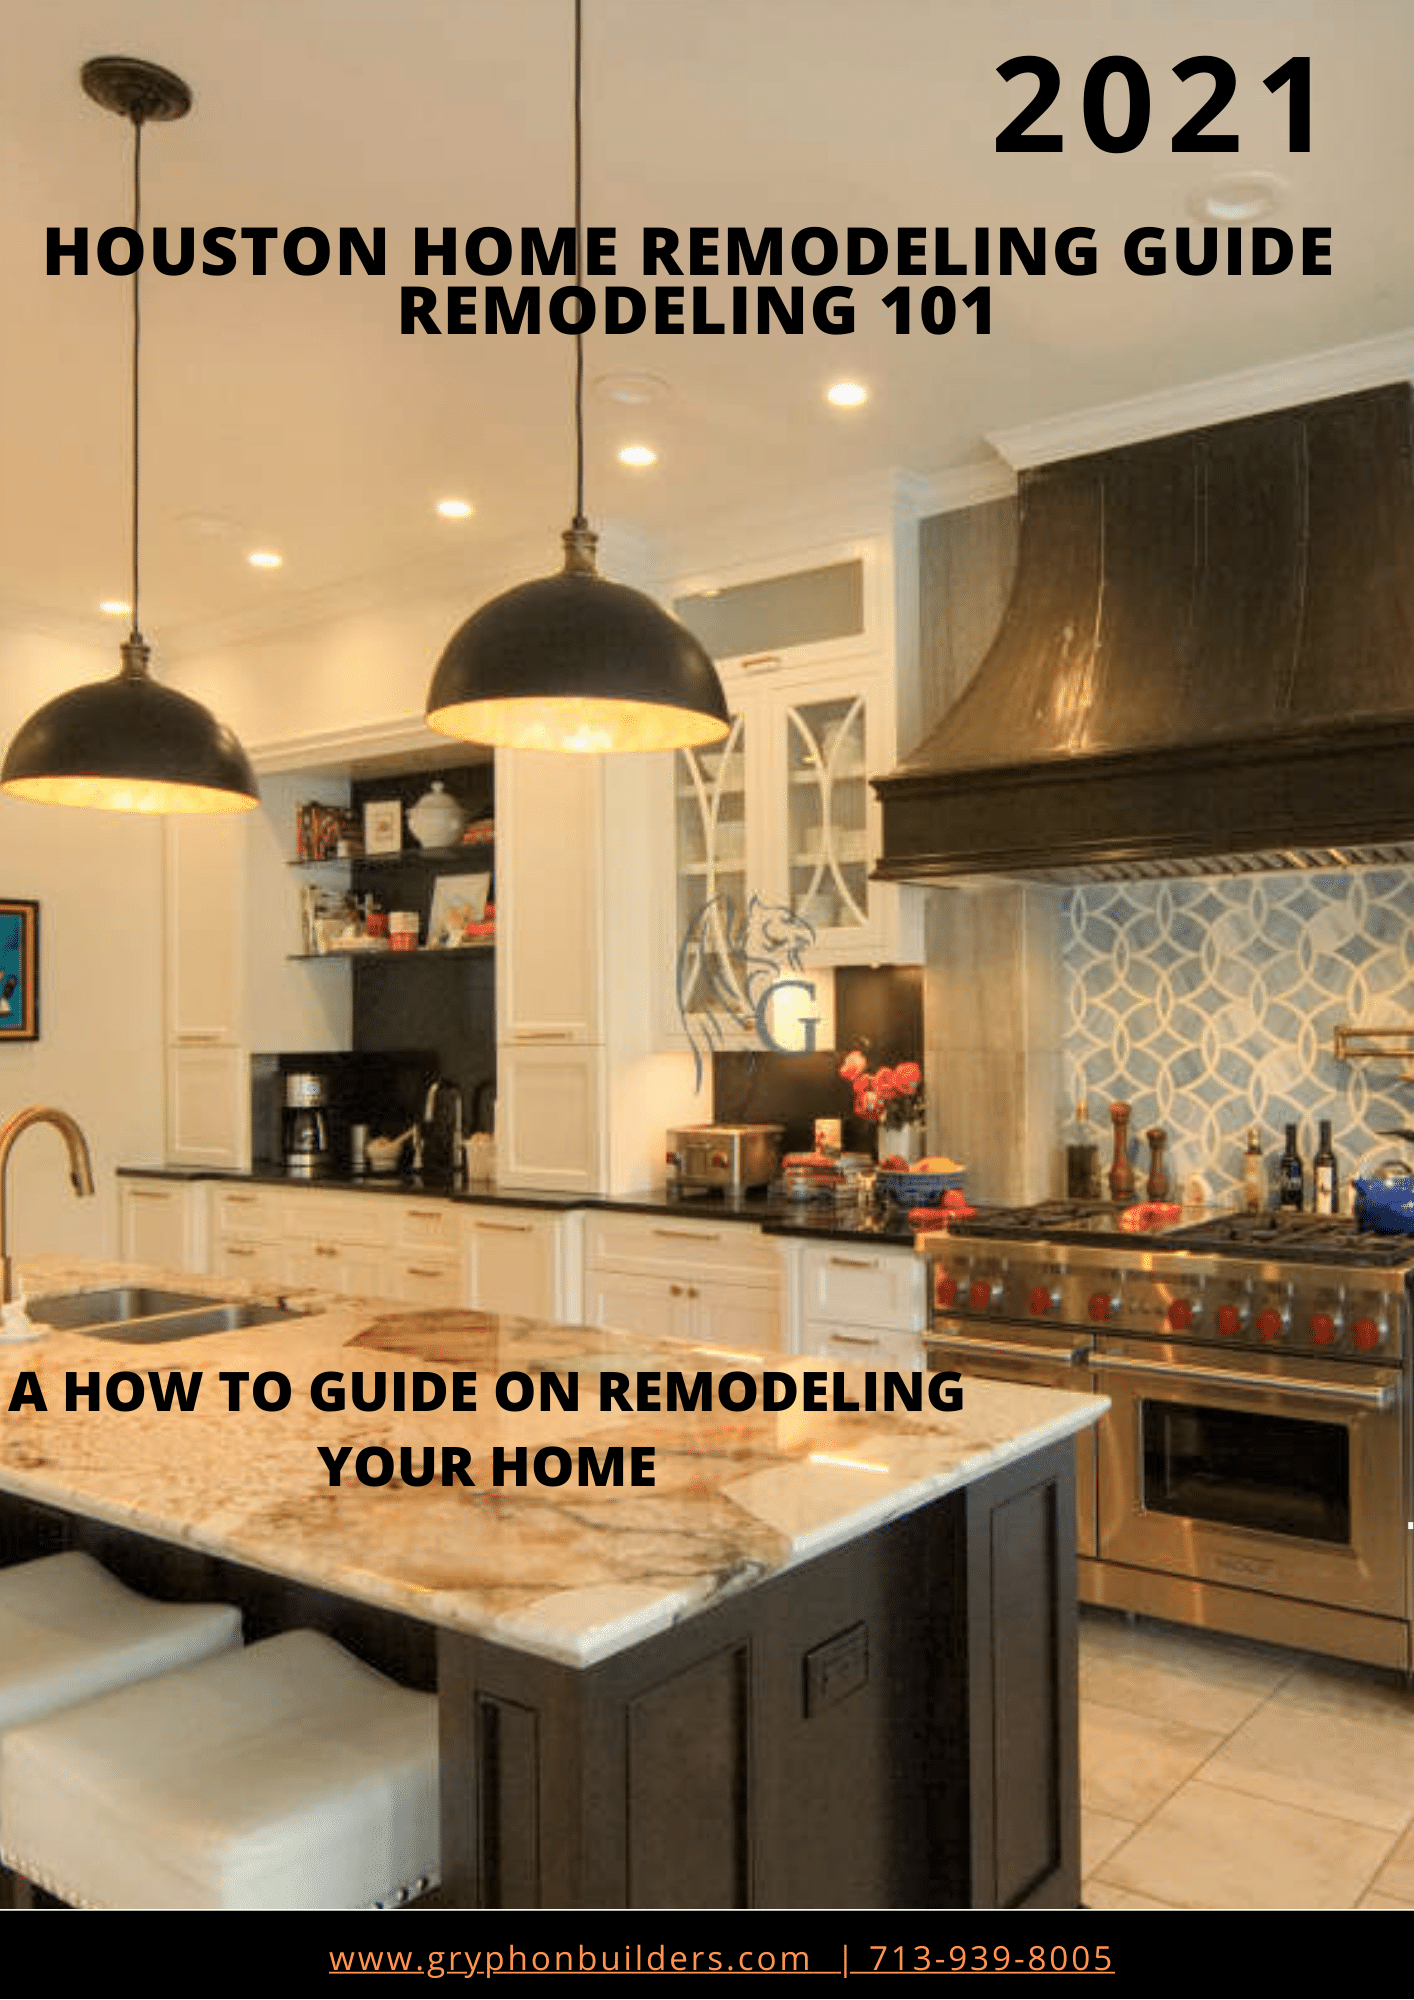 2021 HOUSTON HOME REMODELING Guide